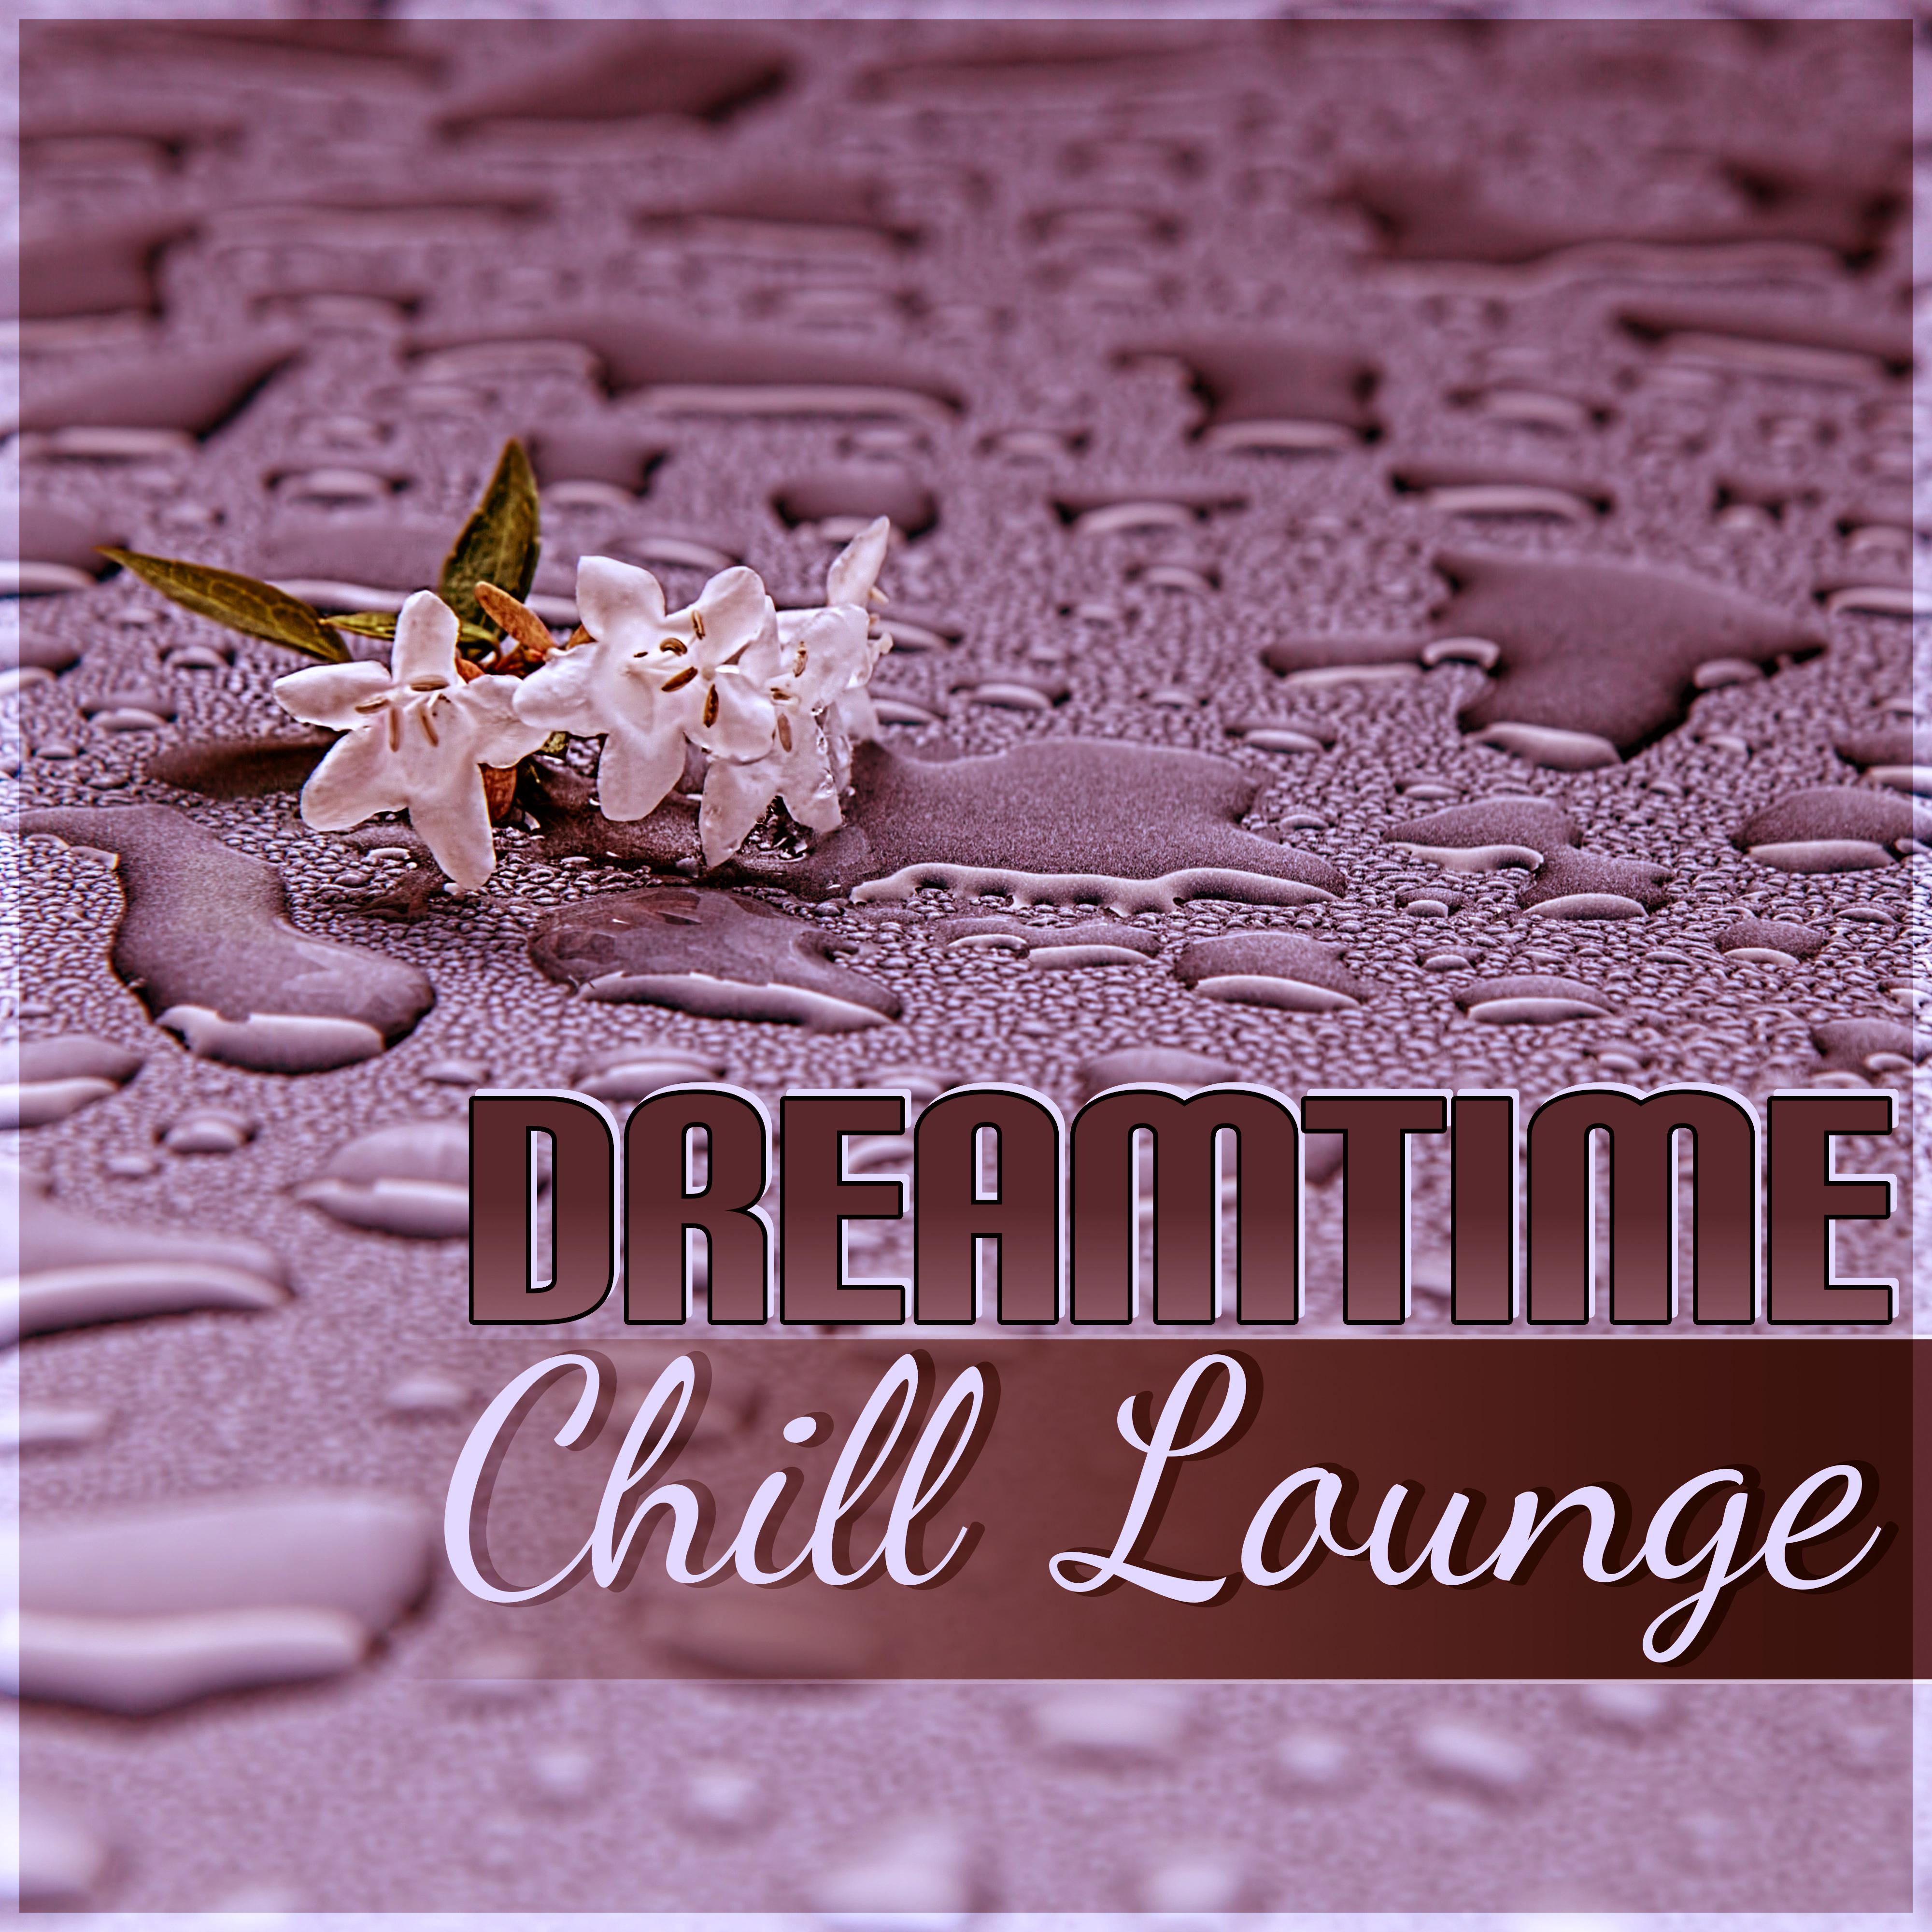 Dreamtime Chill Lounge - Lounge Music Playa del Mar Summer Collection 2015, Acoustic Guitar, Cool Jazz in the Background